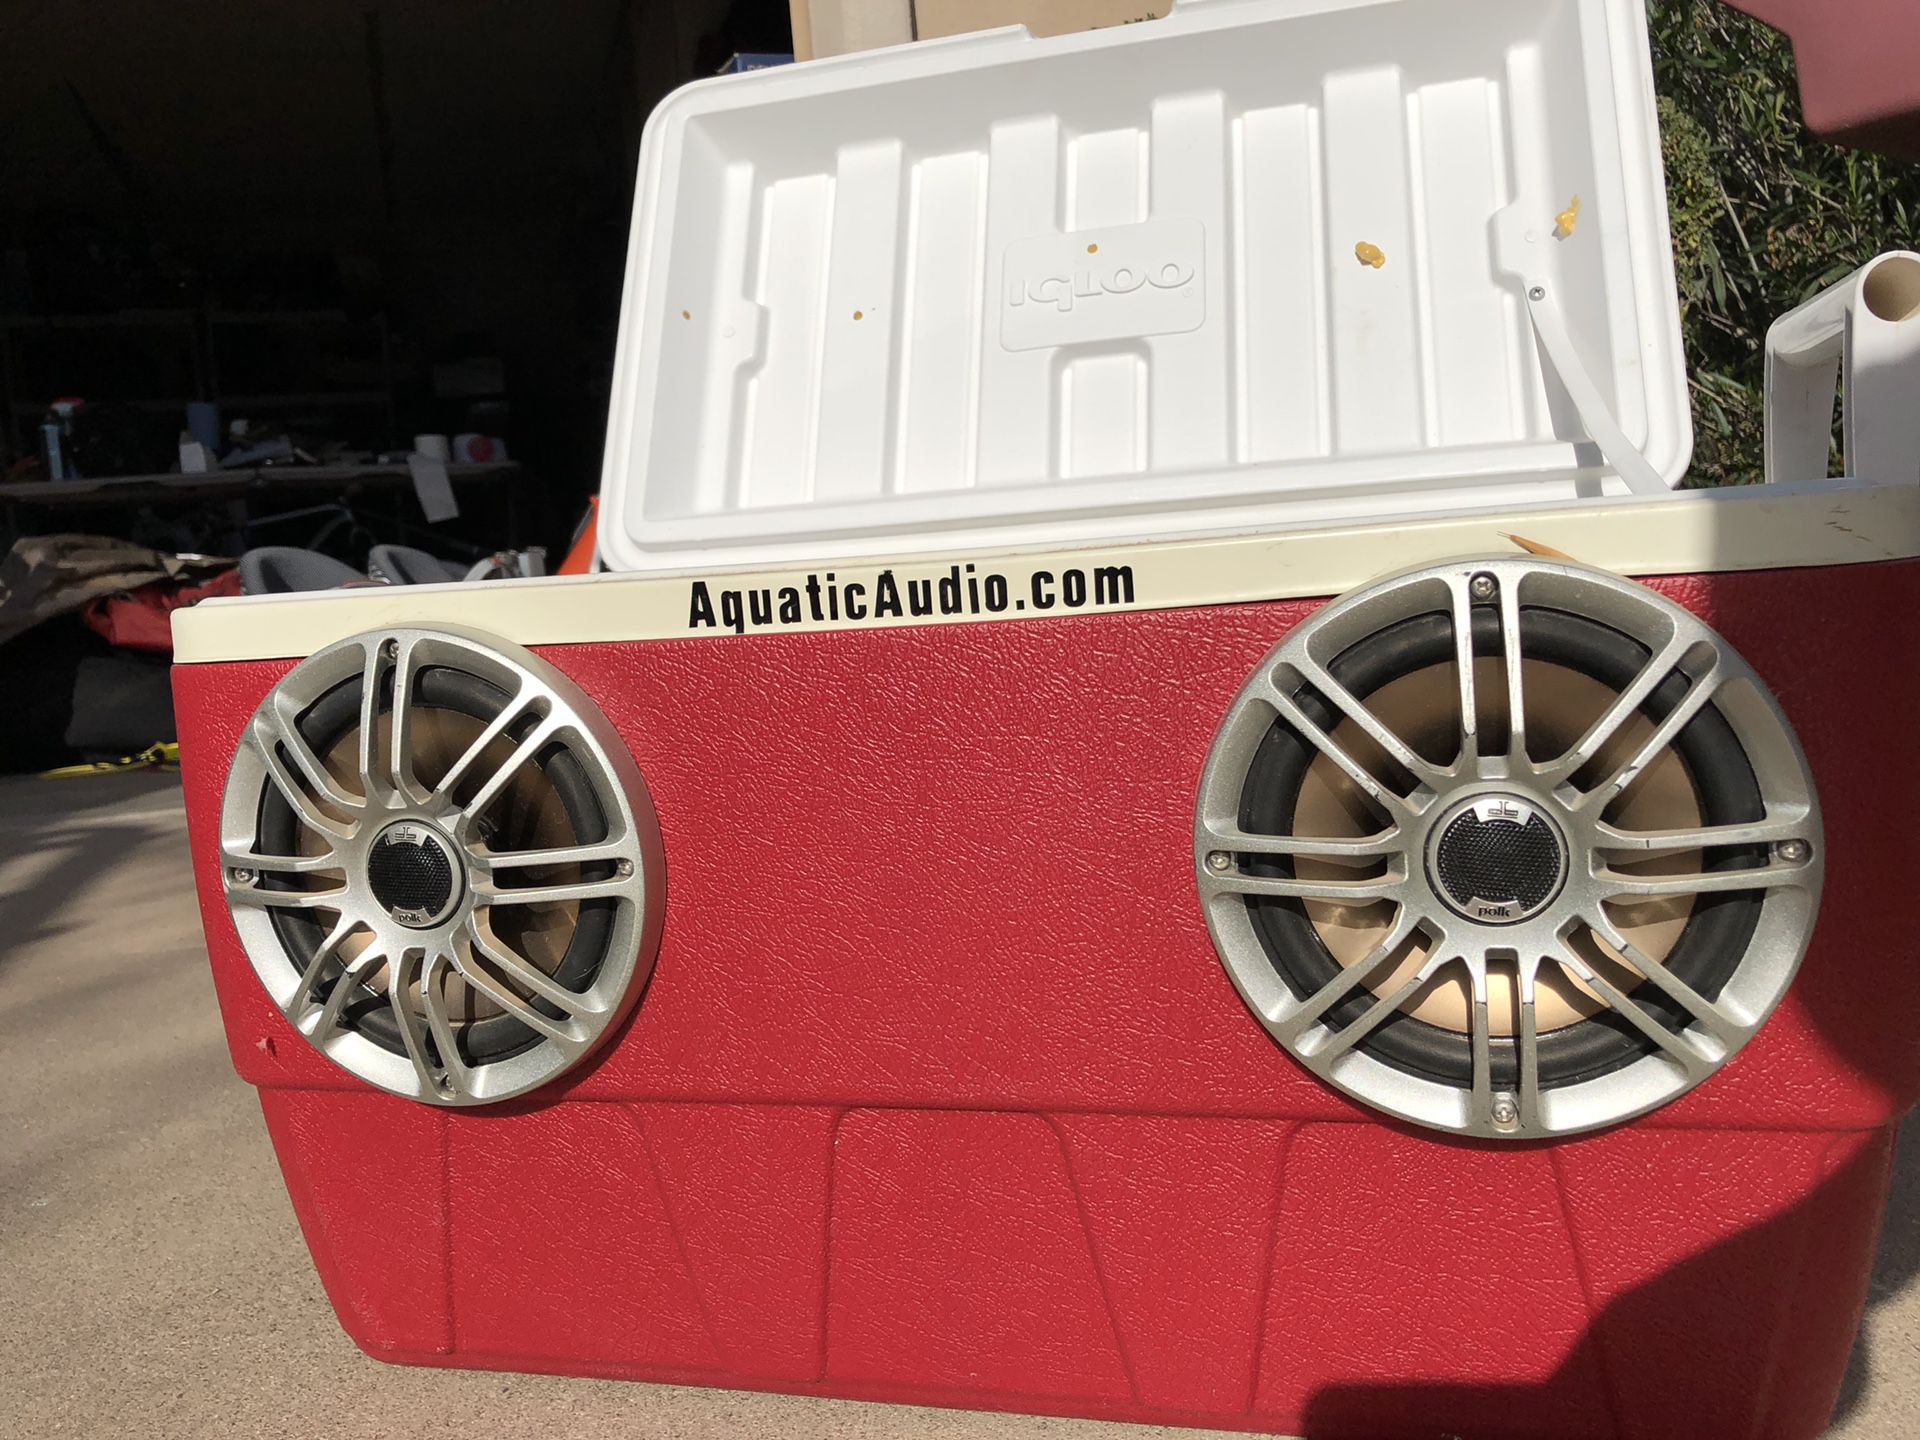 Cooler/Stereo with Polk Marine Speakers